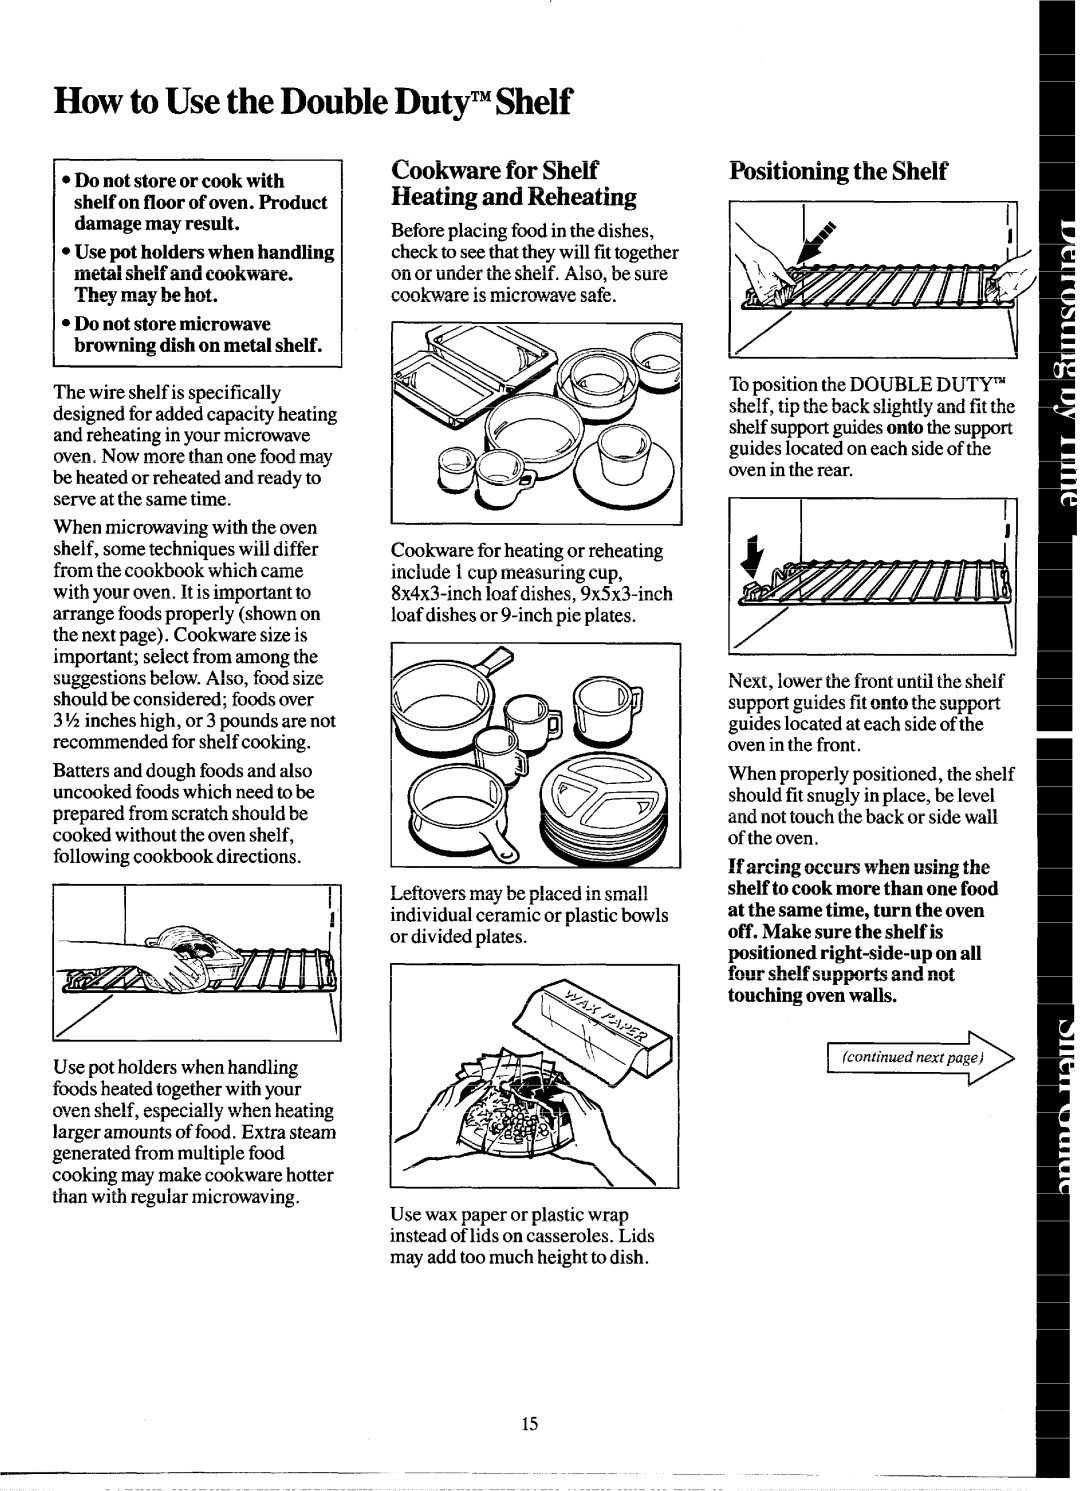 GE JEM31H manual How to Use the Double DutyTMShelf, Cookware for Shelf Heating and Reheating, Positioning the Shelf 